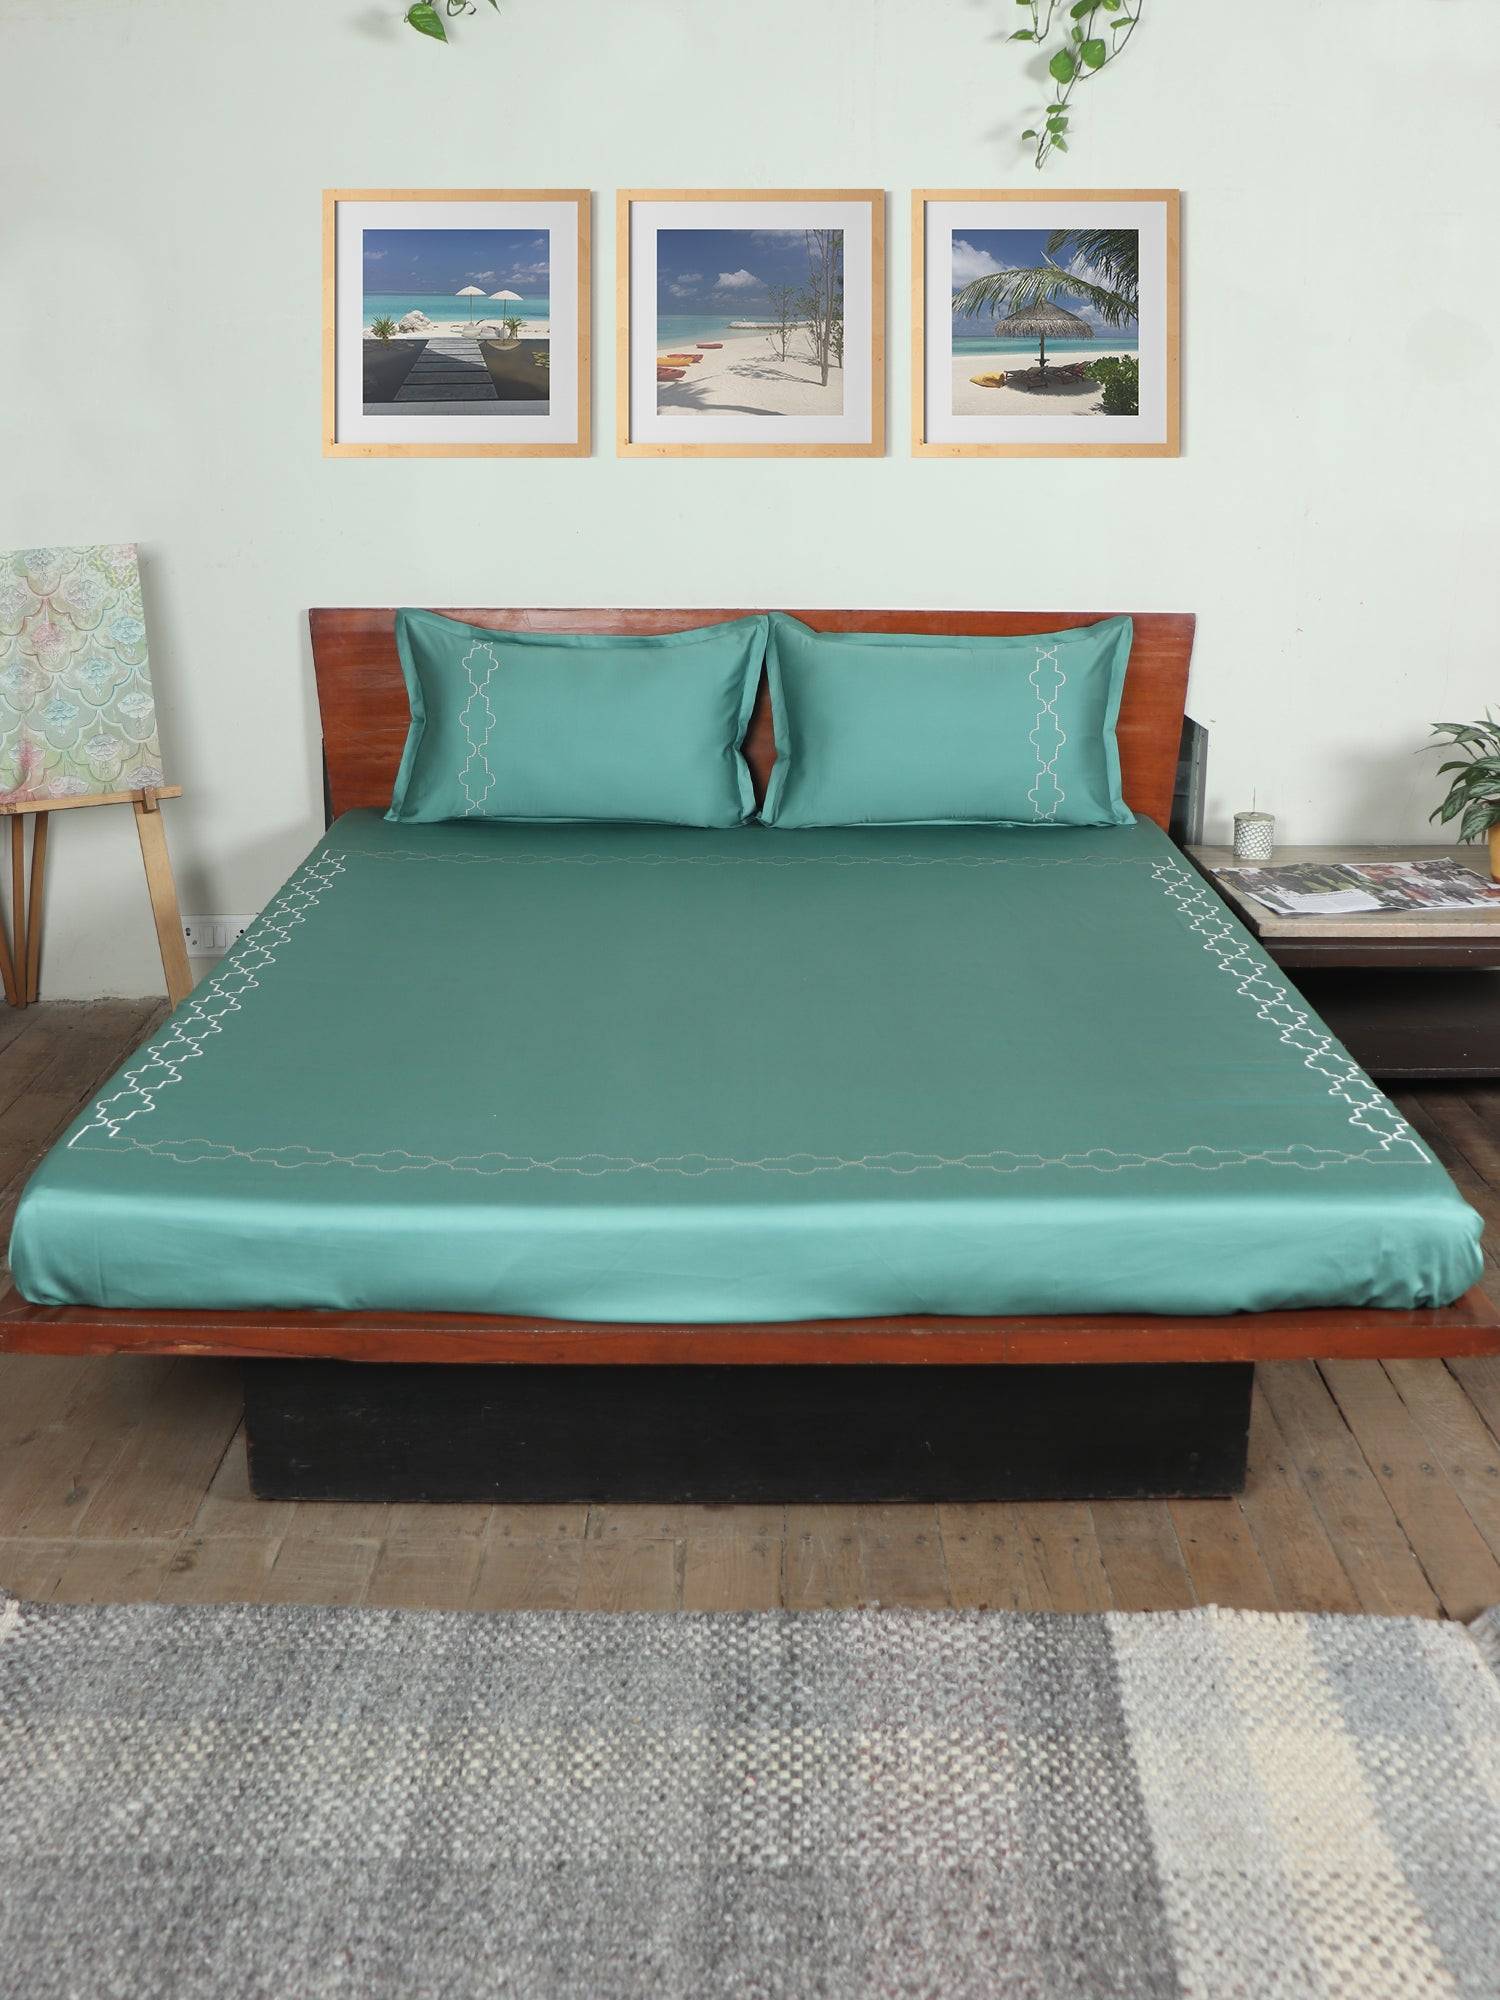 Embroidered Bedsheet 100% Cotton 400 TC for King Size Double Bed with Pillow Covers Green - Bedsheet 108x108inches, Pillow Covers 17x27inches